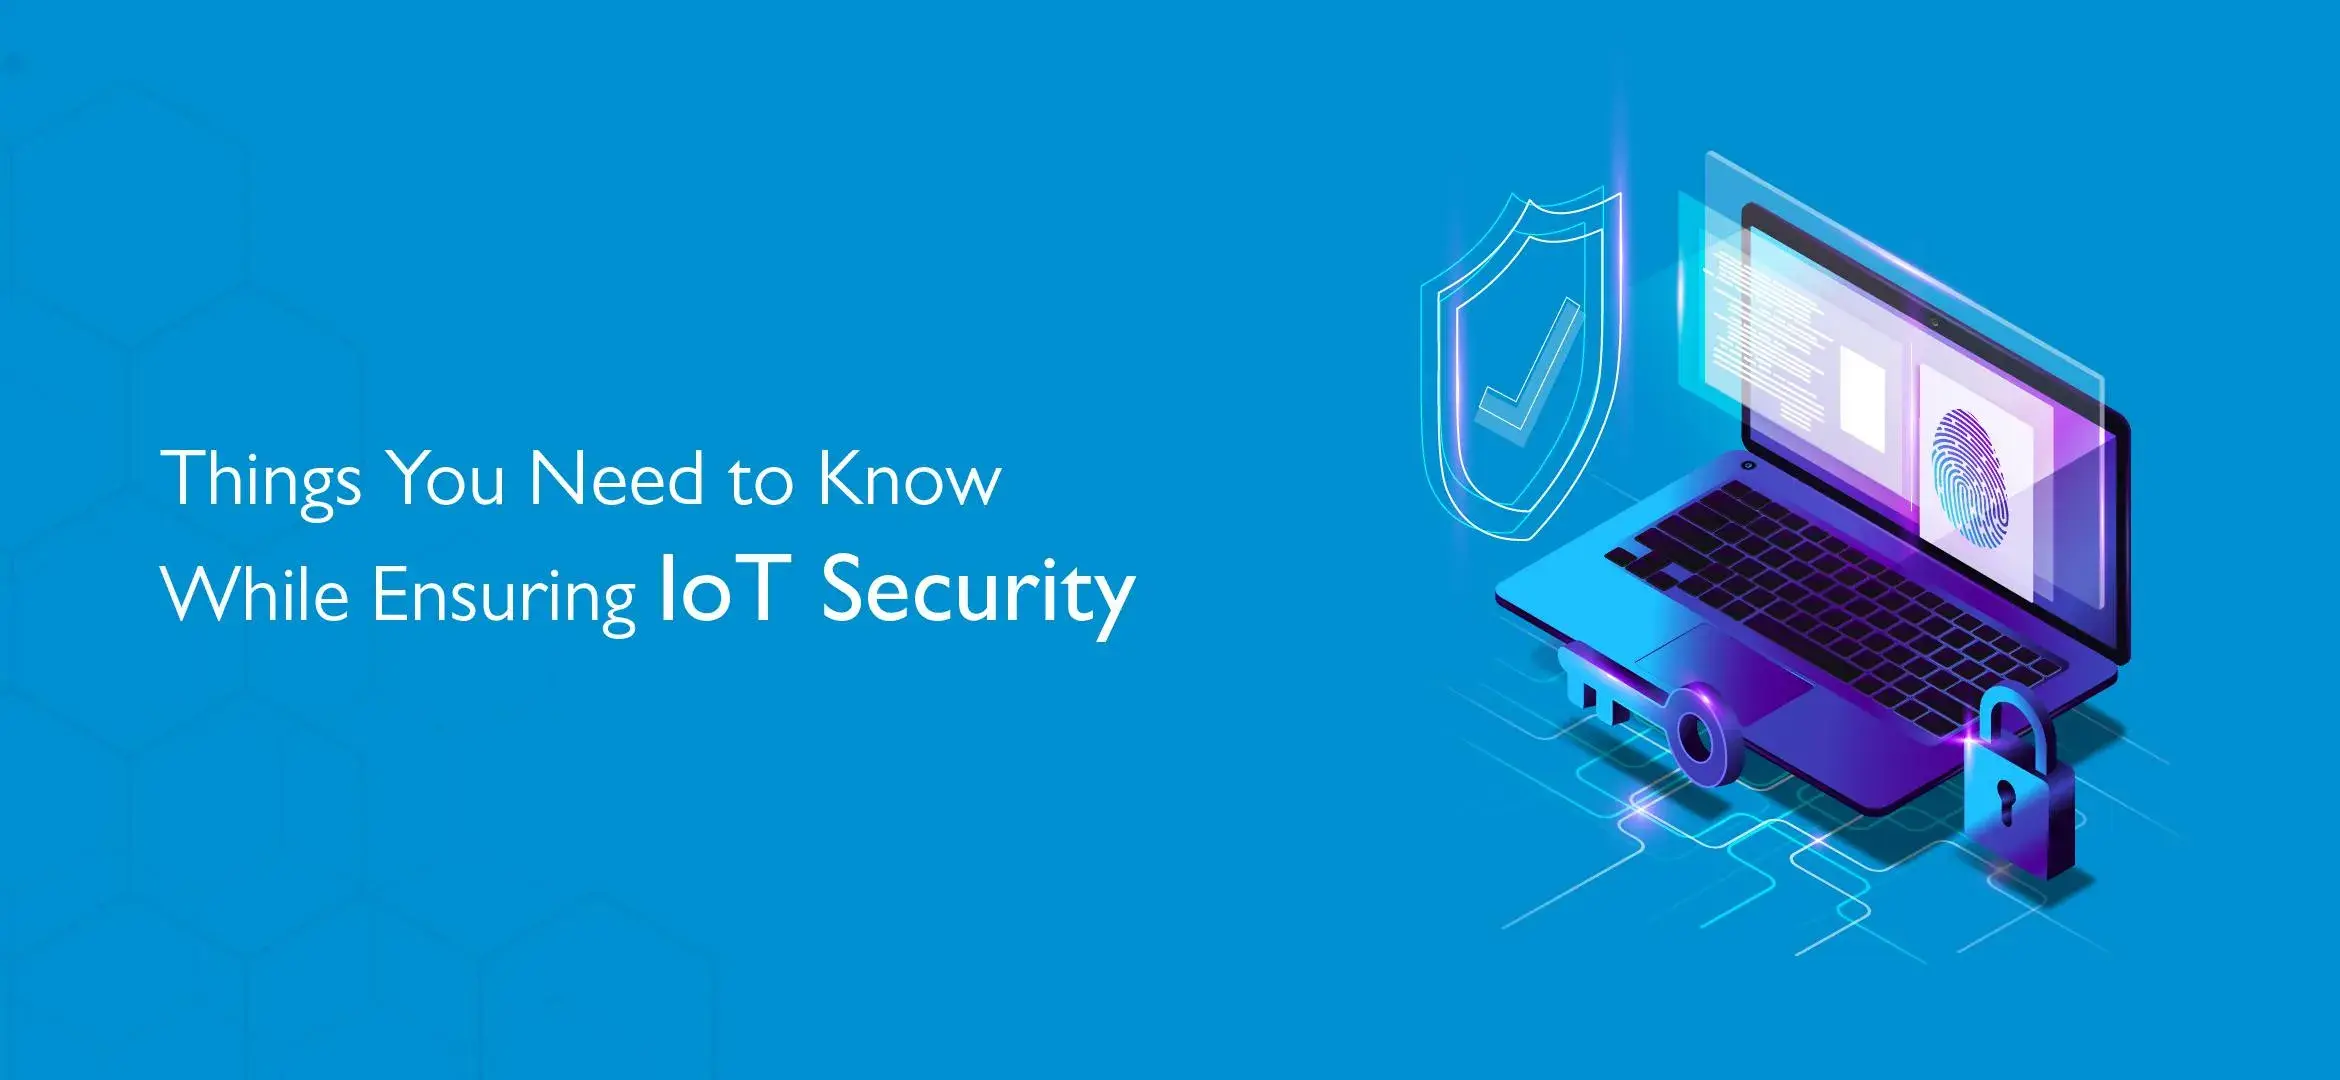 1712233523Things You Need to Know While Ensuring IoT Security.webp